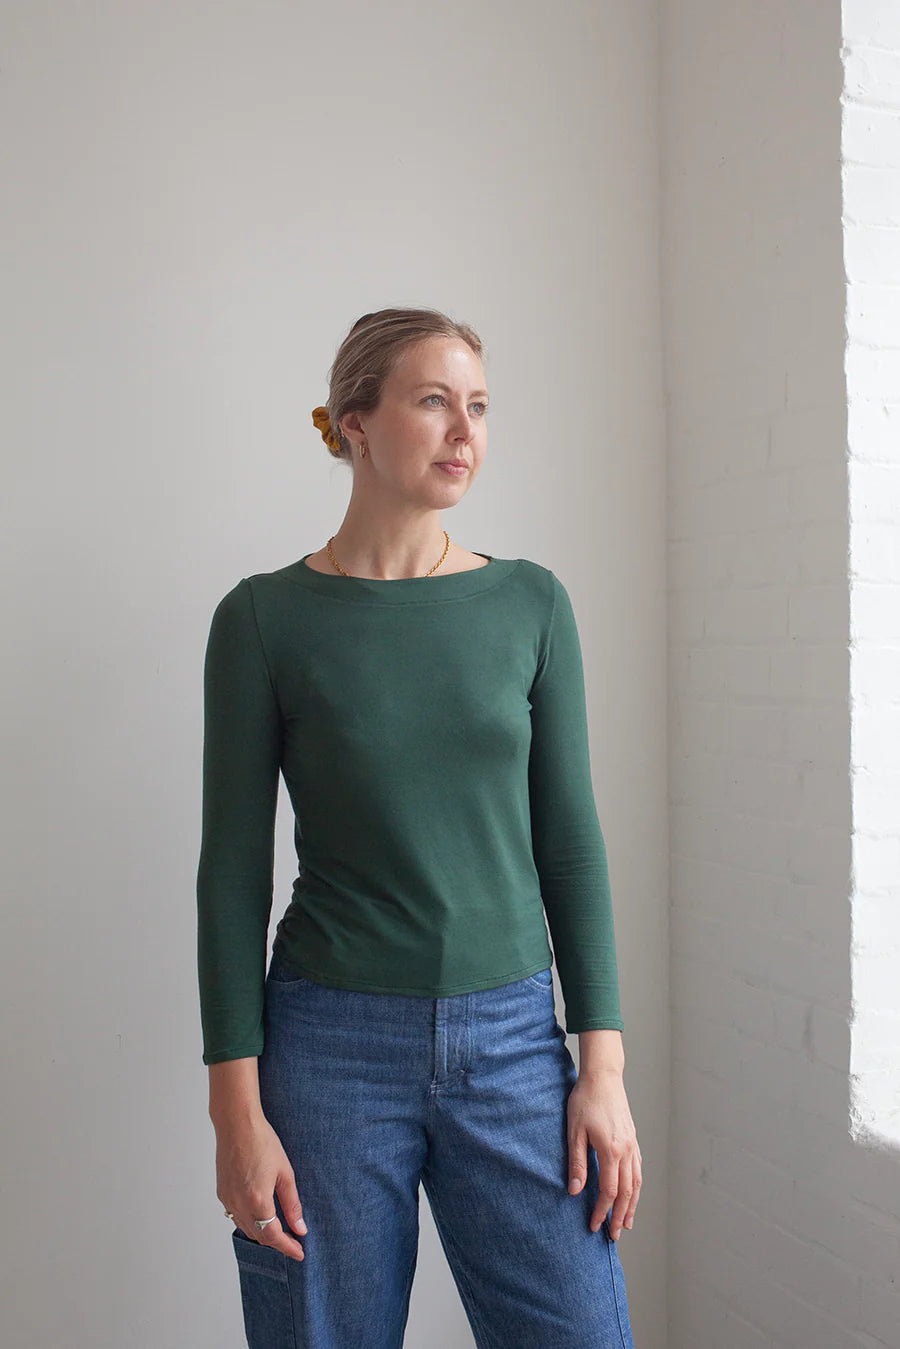 The Modern Sewing Co. Boatneck Top - PDF Pattern